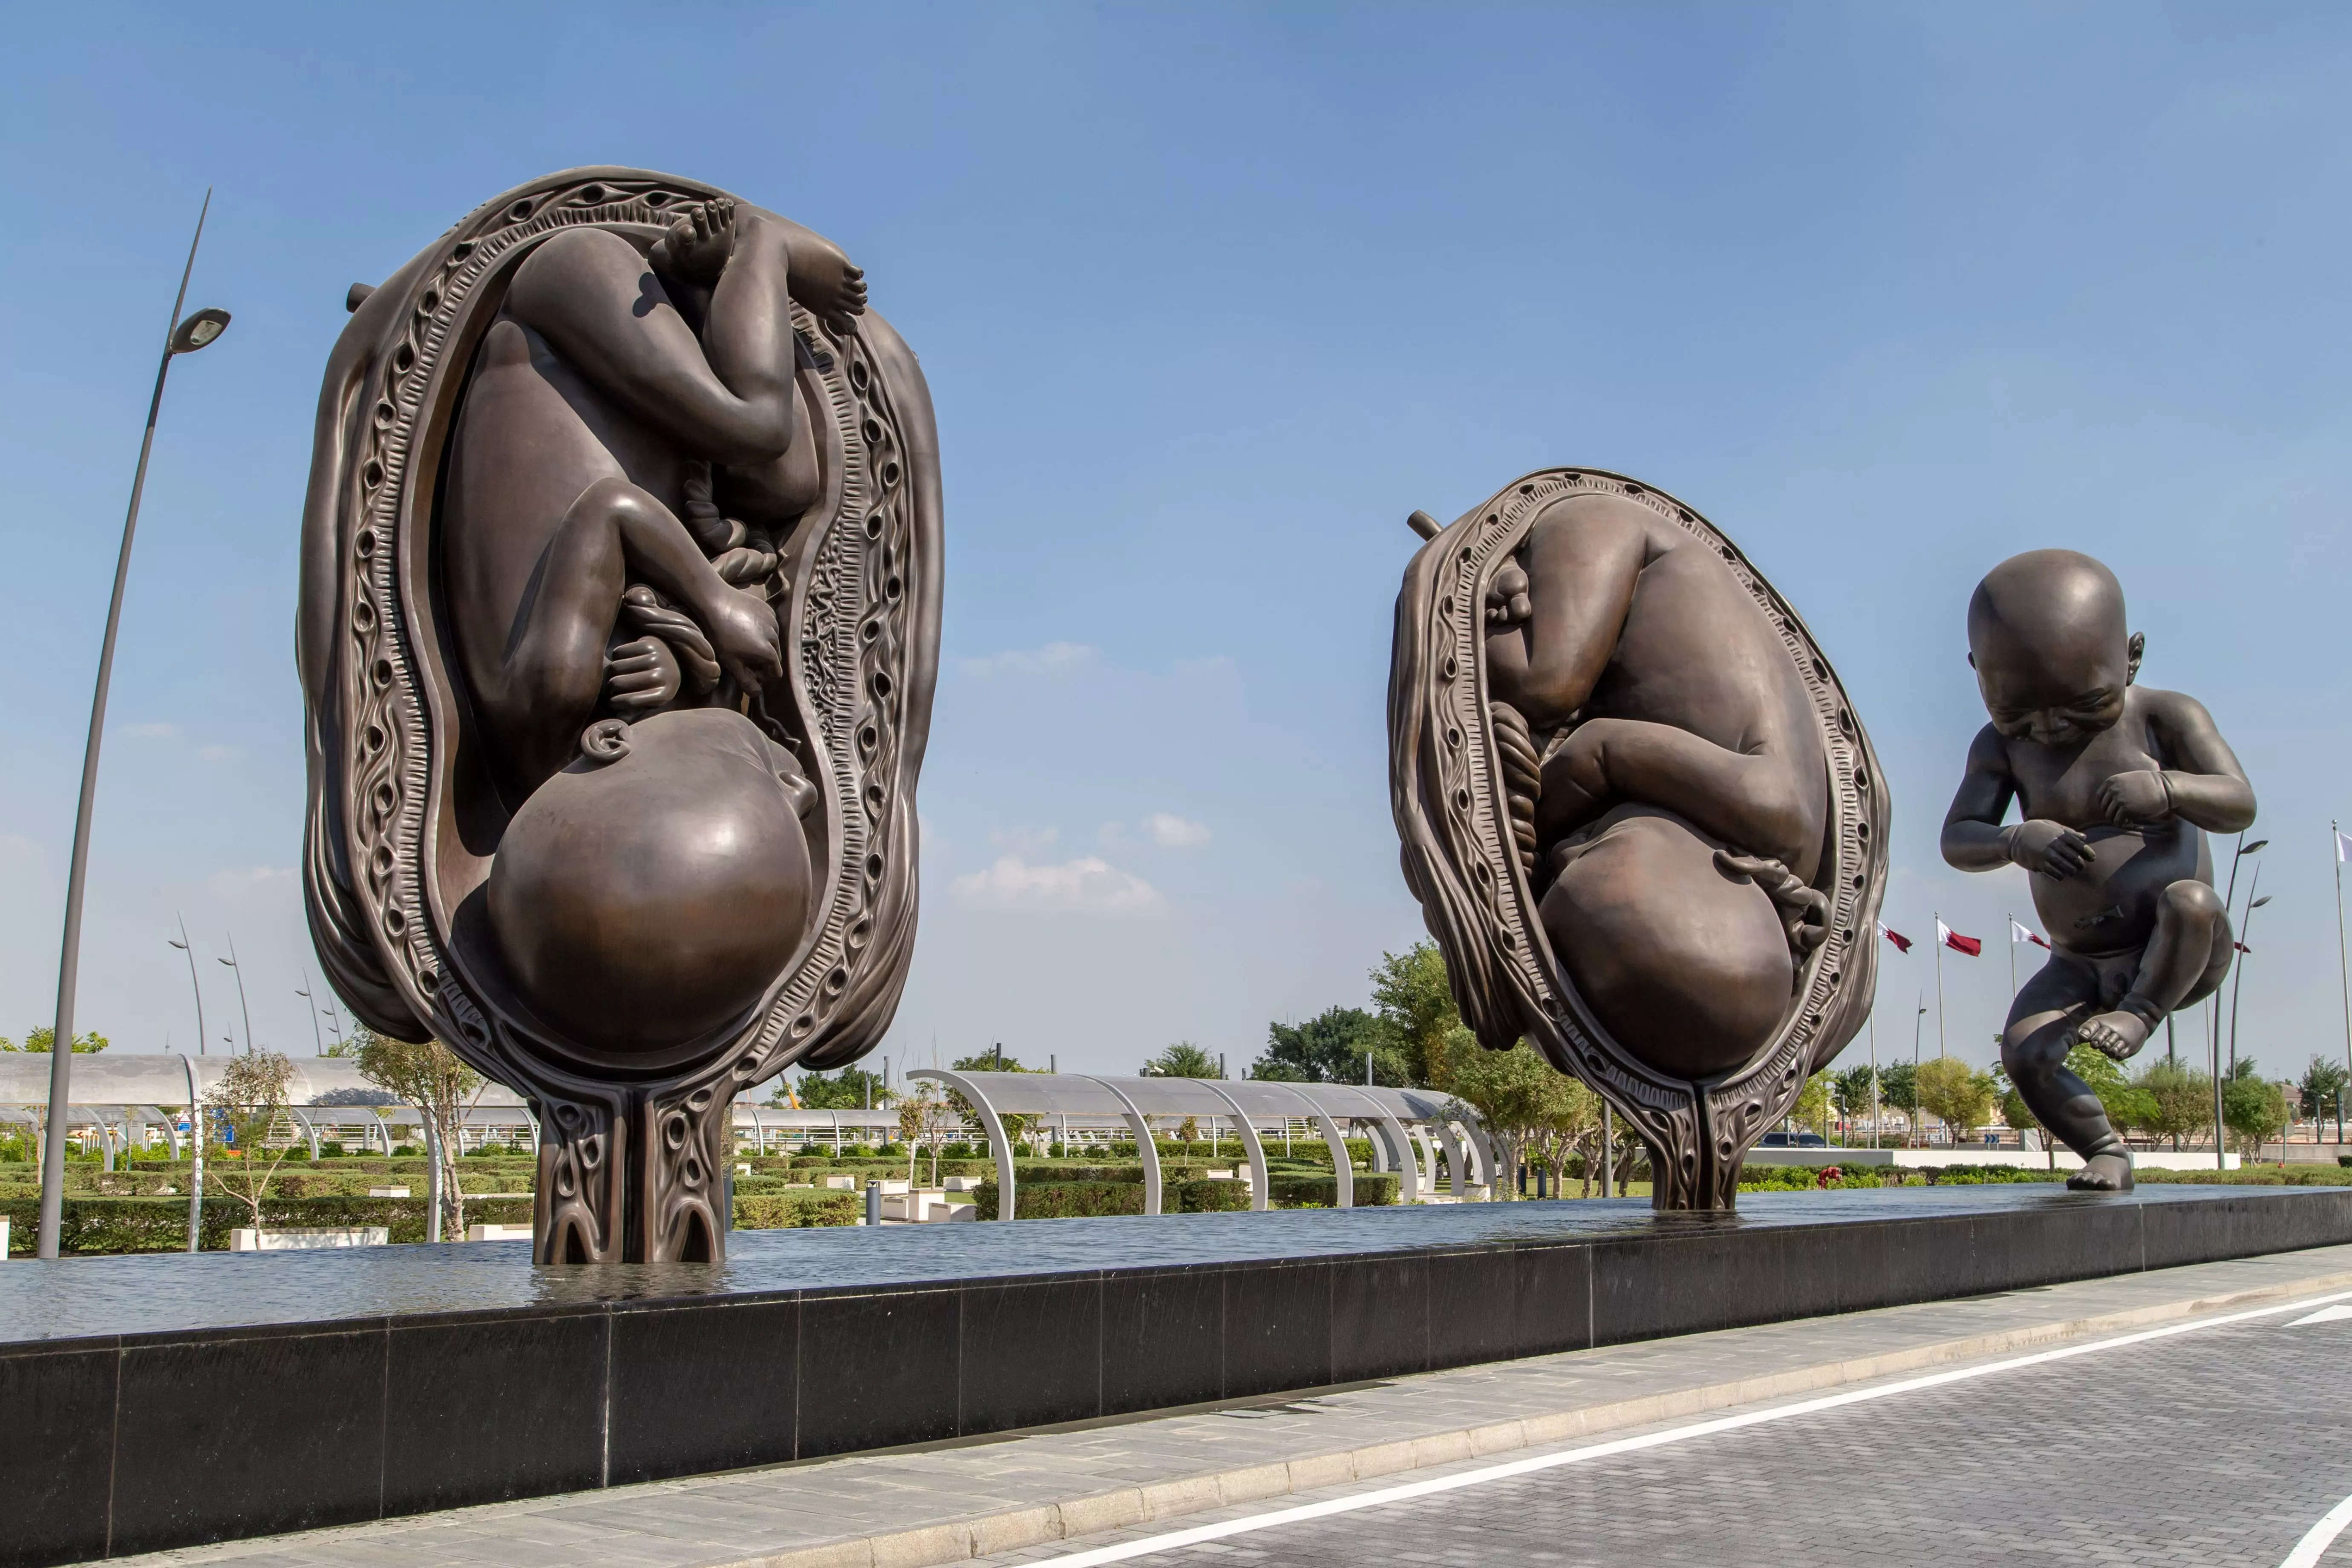 Public art installations in Qatar that you would not want to miss